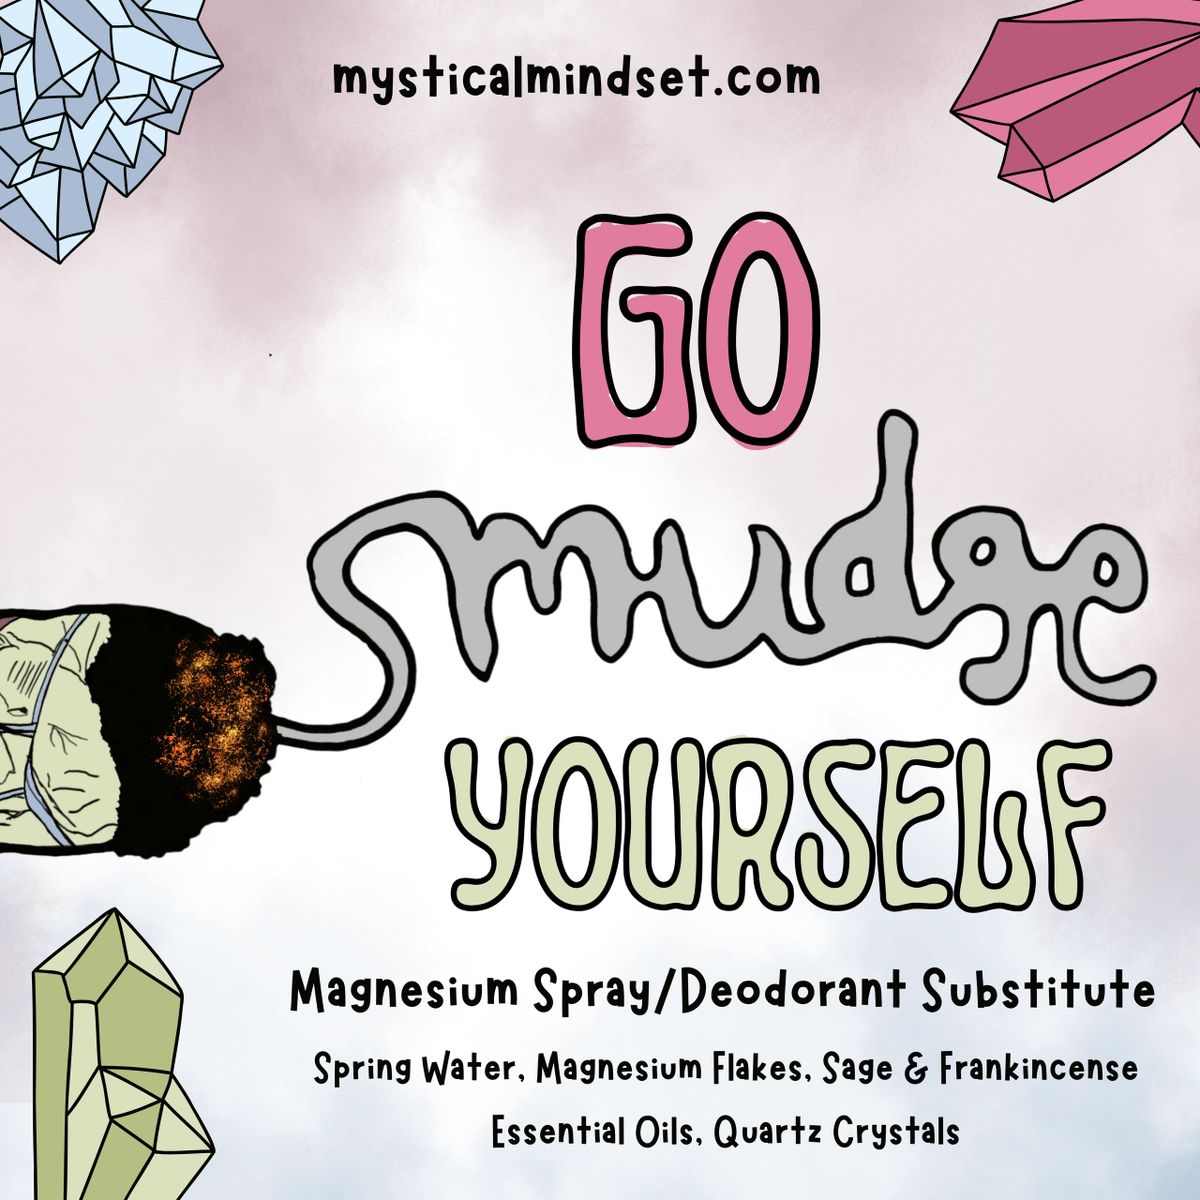 Magnesium Spray - Go Smudge Yourself by Mystical Mind